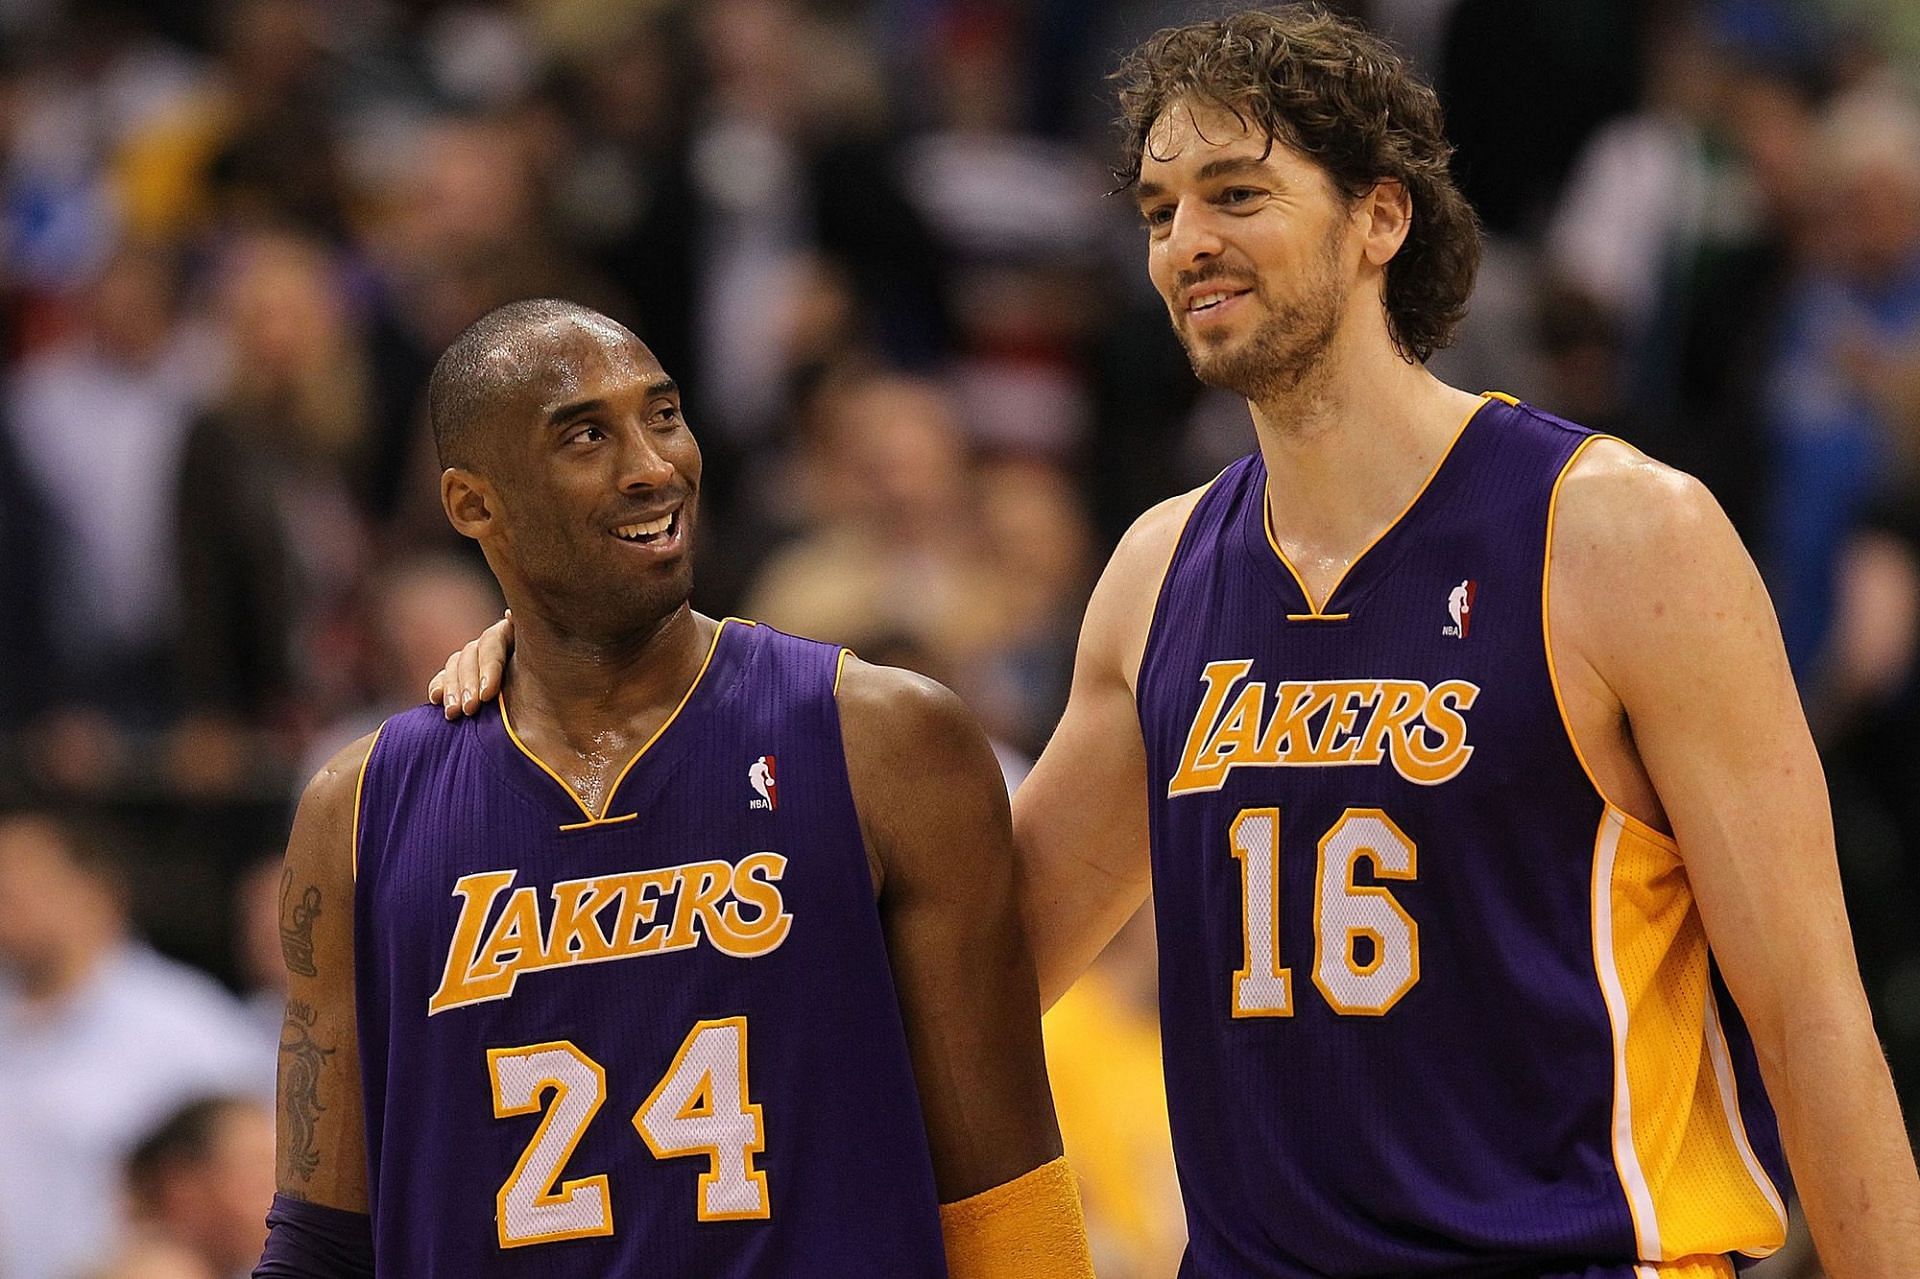 The LA Lakers paired Kobe Bryant with Pau Gasol to bring more success to the franchise. [Photo: New York Post]